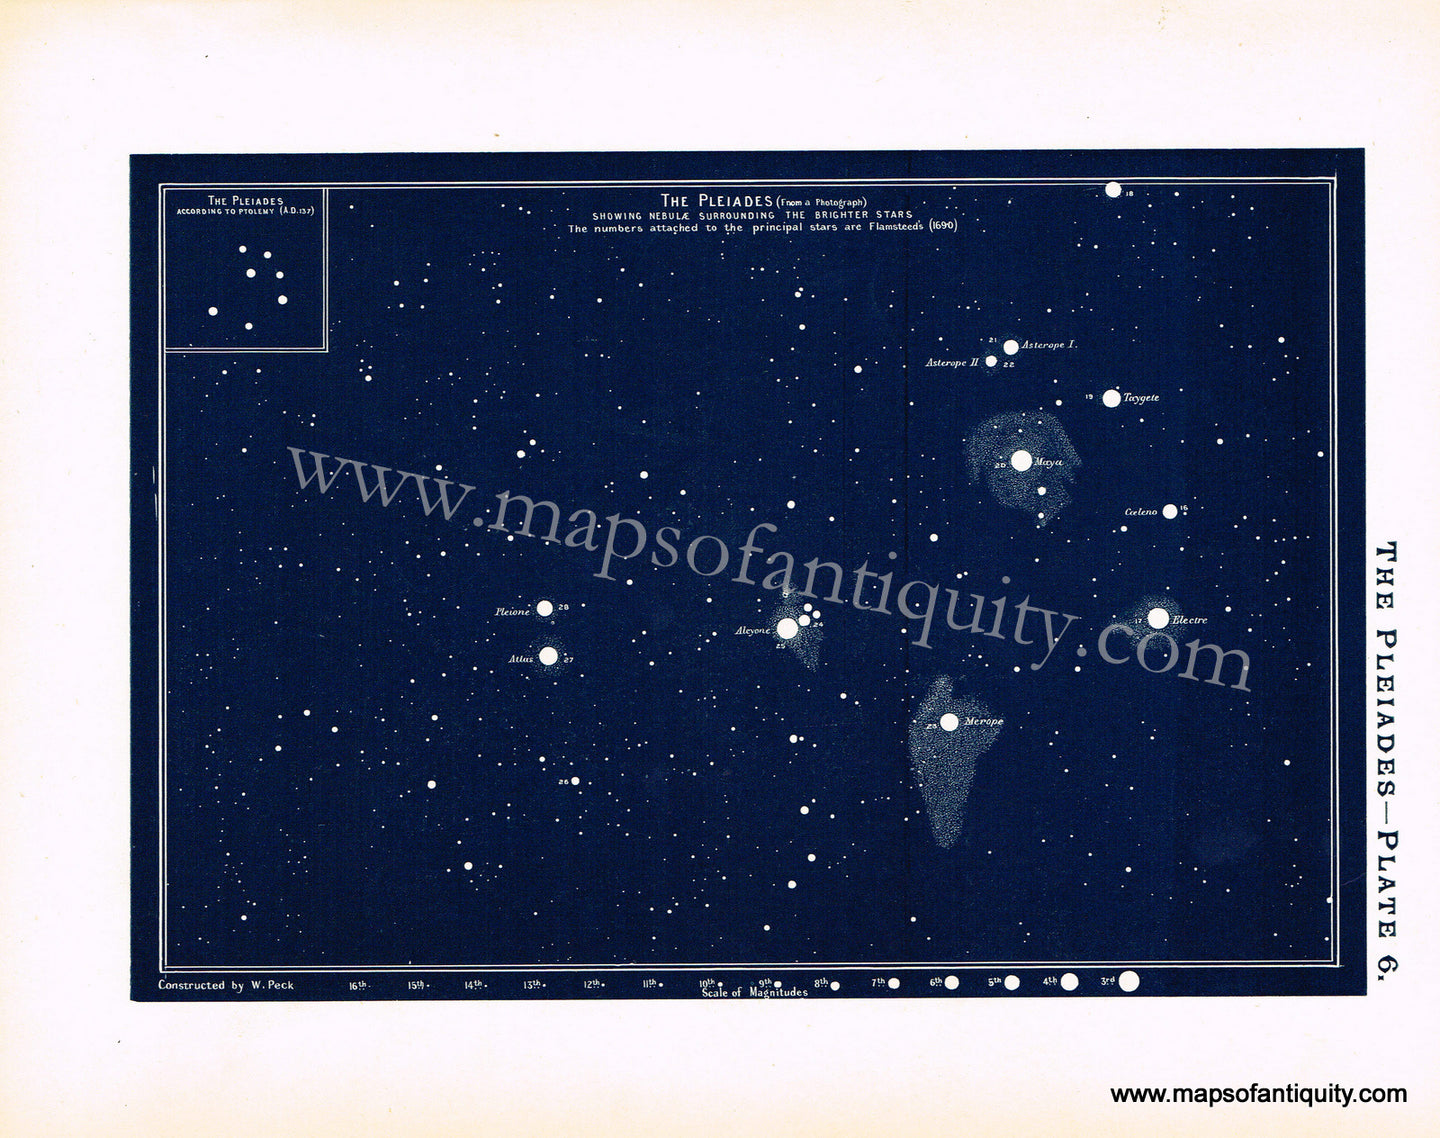 Antique-Printed-Color-Celestial-Map-The-Pleiades----Plate-6.-**********-Celestial--1890-W.-Peck-Maps-Of-Antiquity